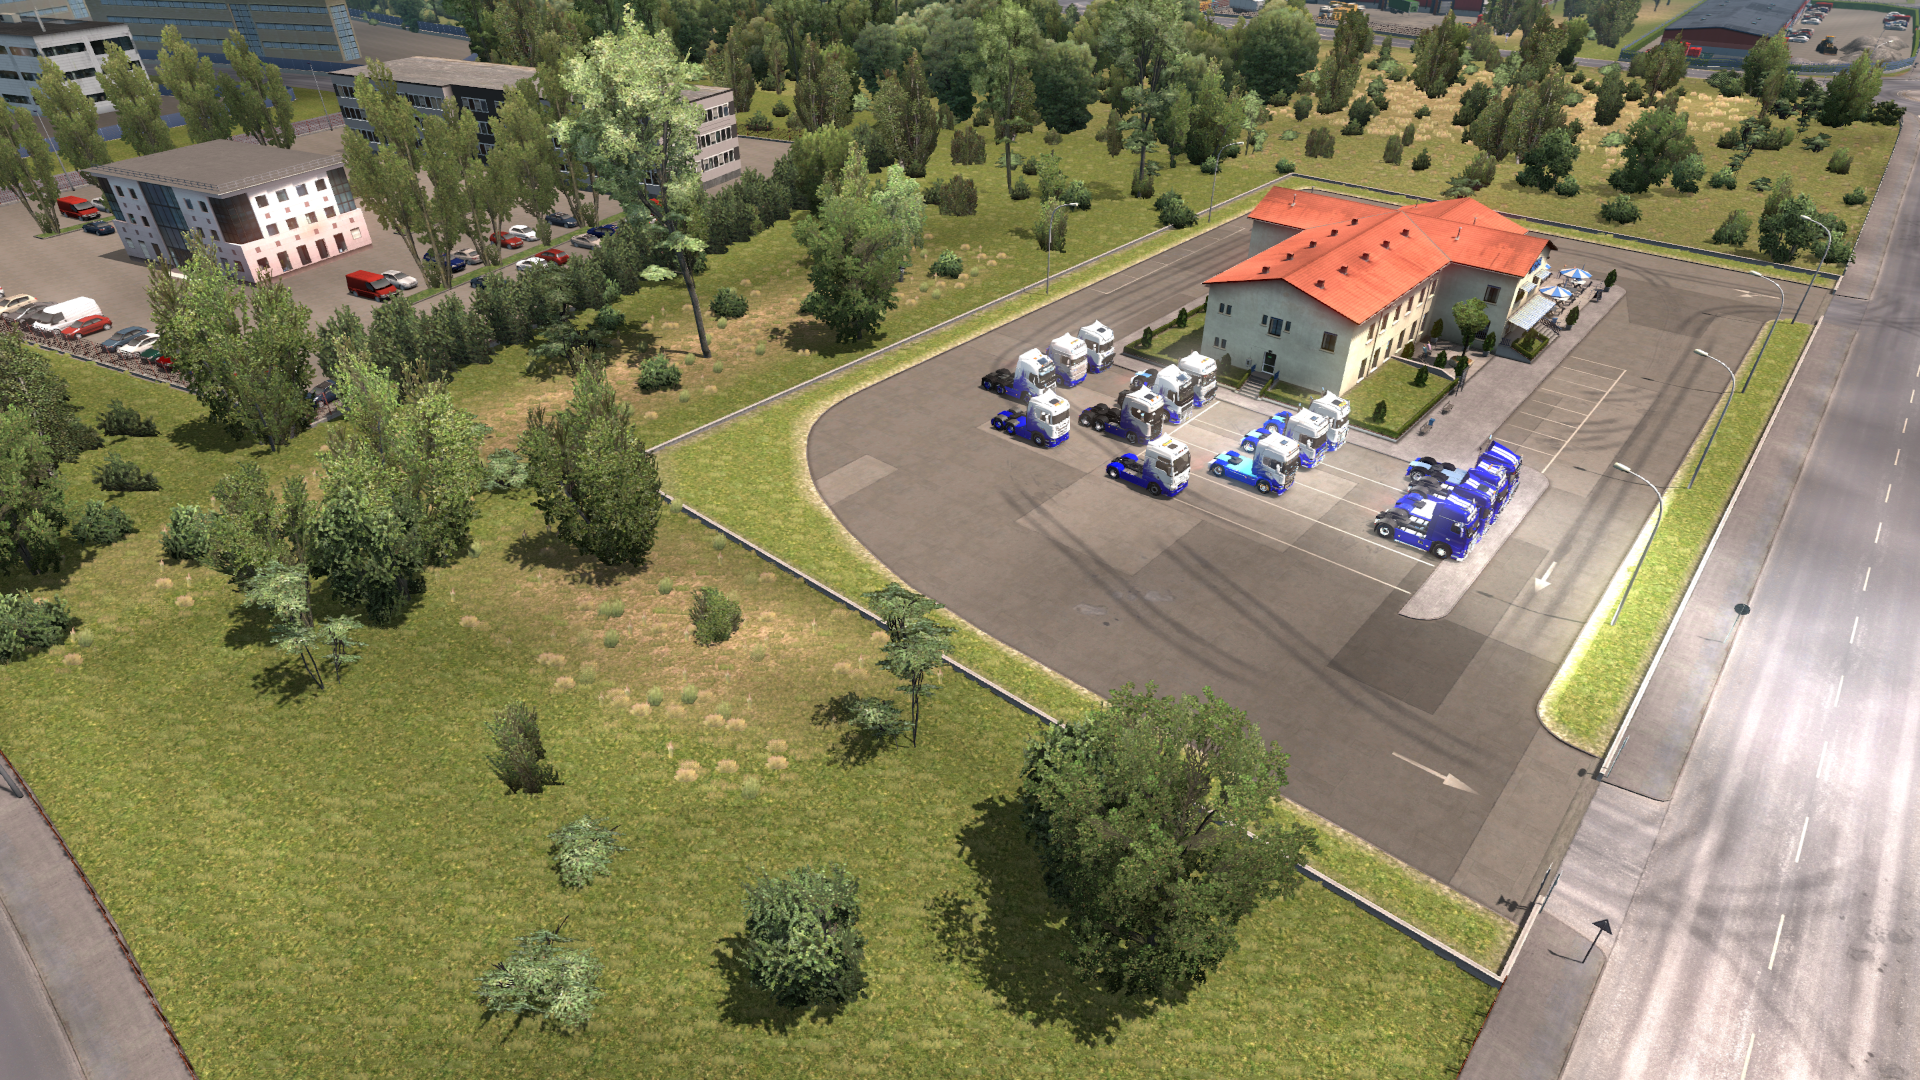 ets2_20190601_000918_00.png